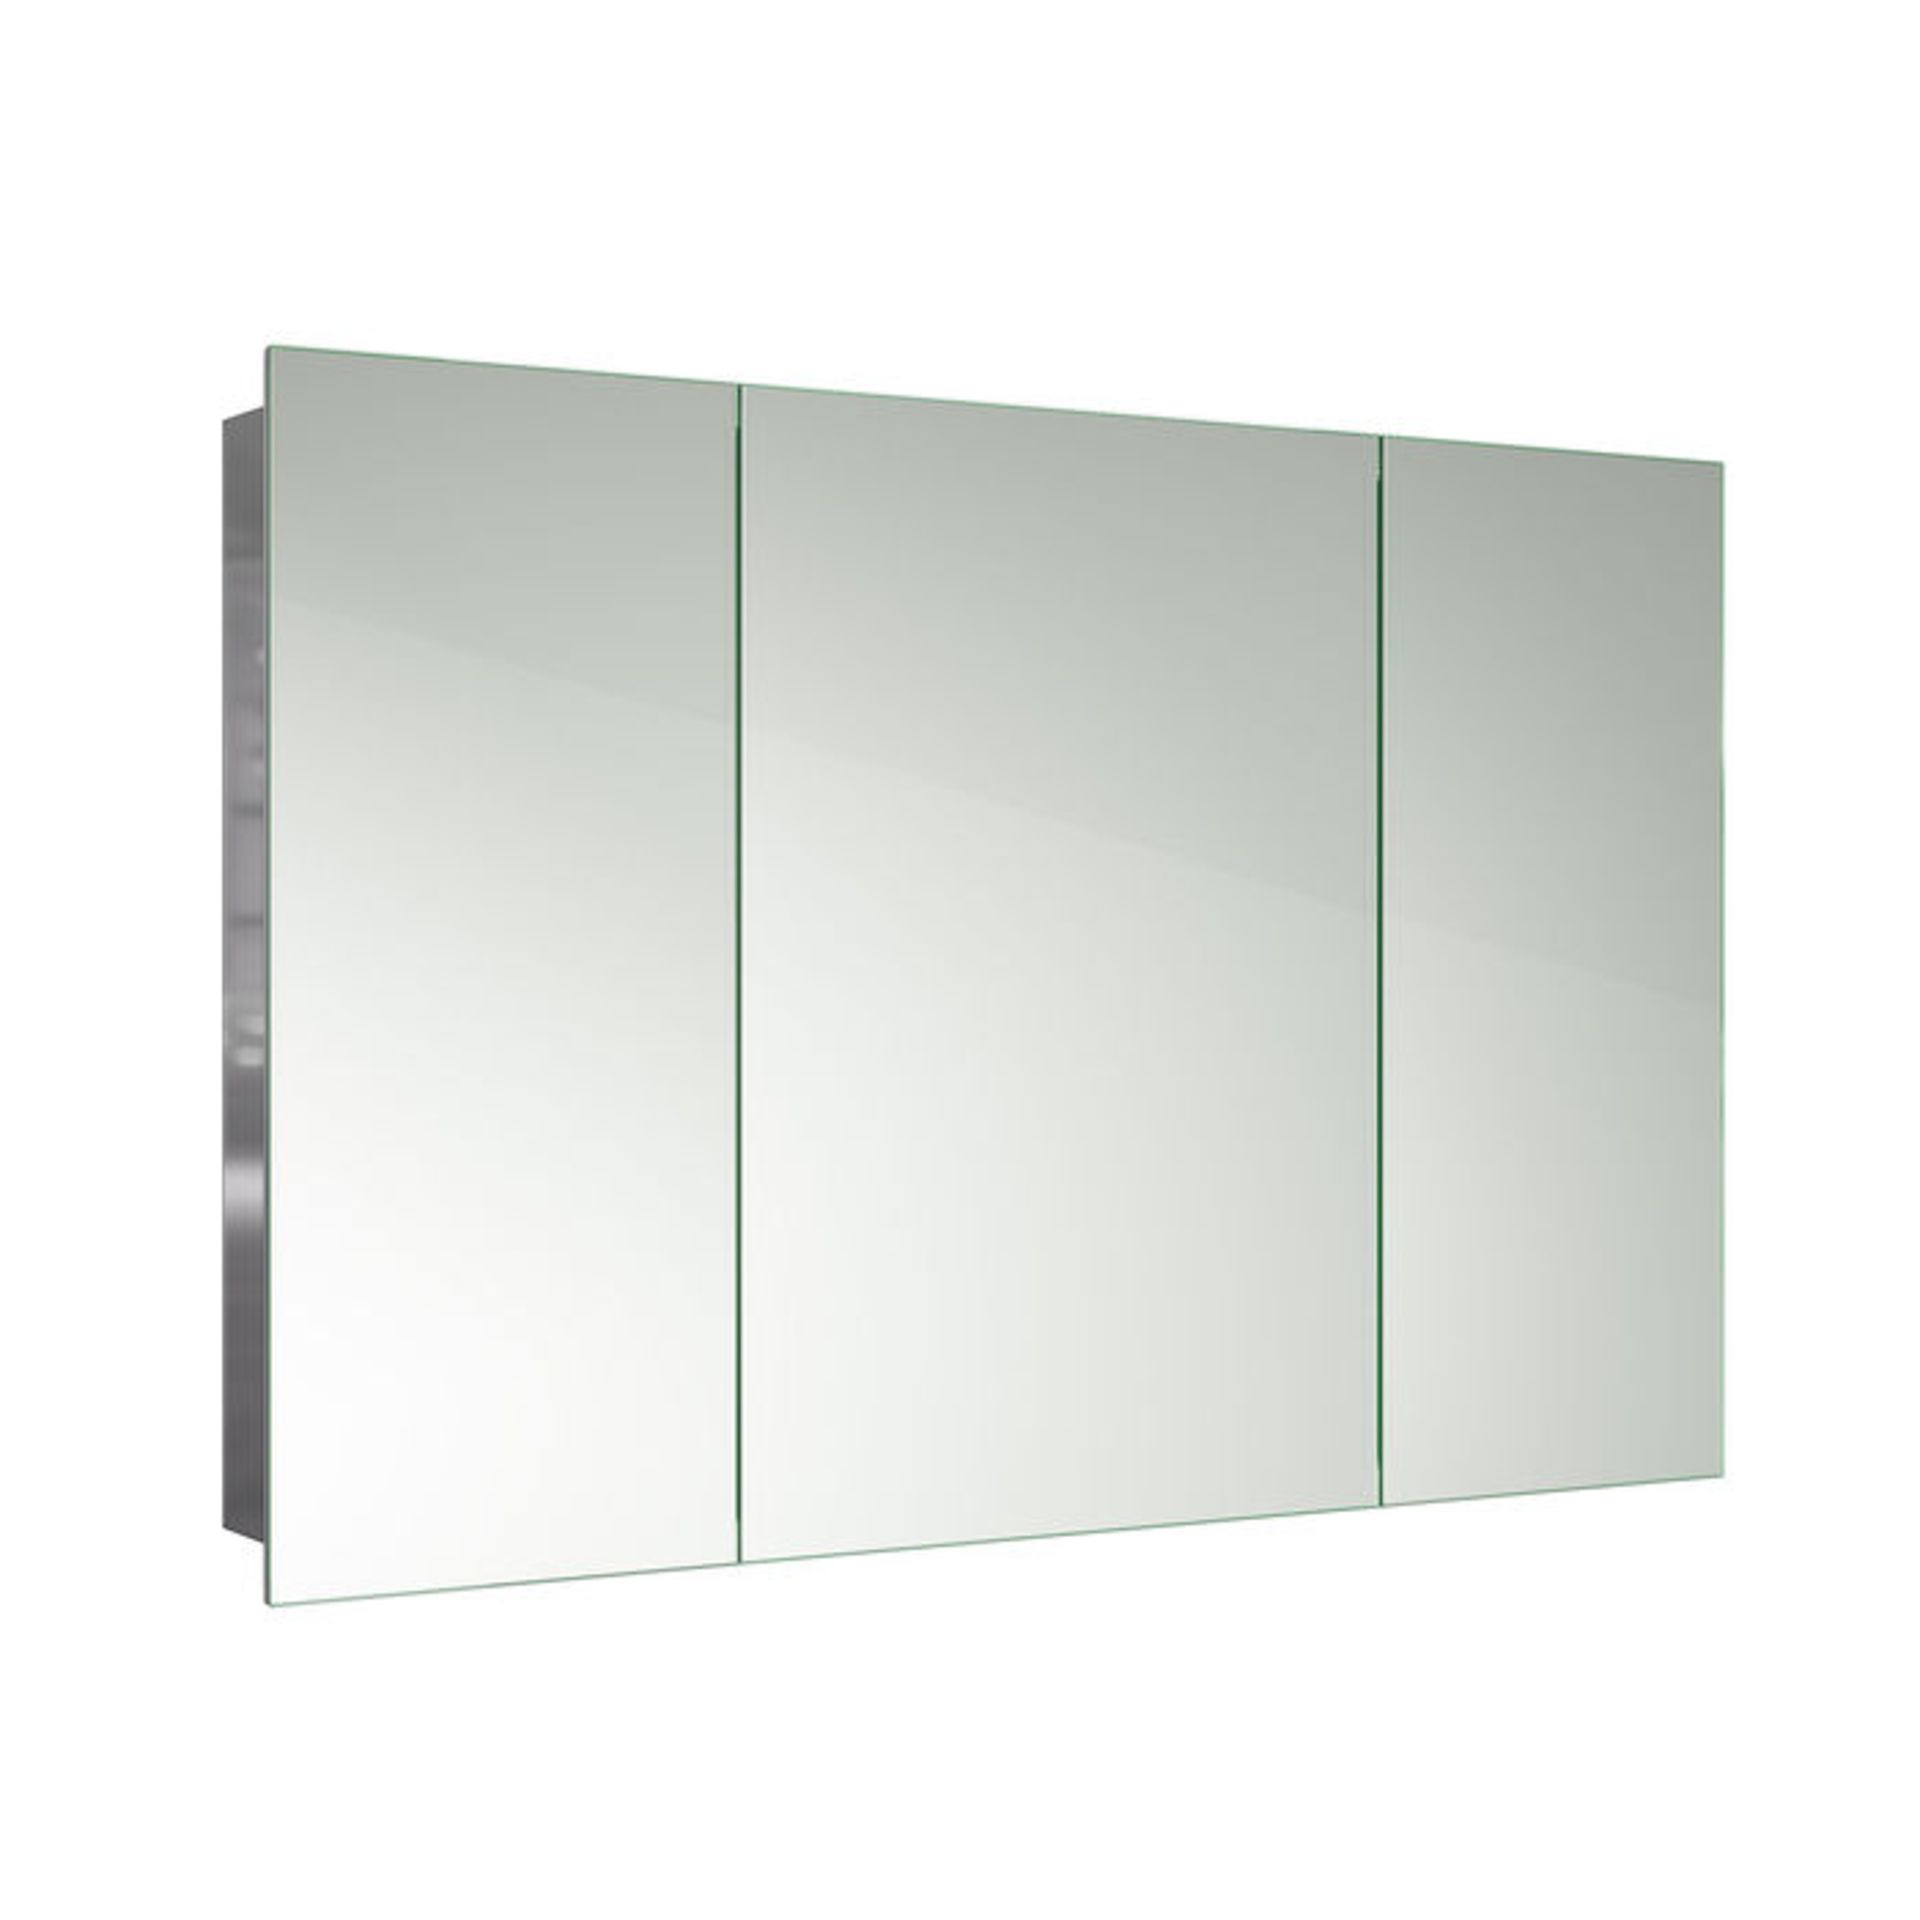 (DK192) 900x600mm Liberty Stainless Steel Triple Door Mirror Cabinet. Made from high-grade stainless - Image 3 of 3